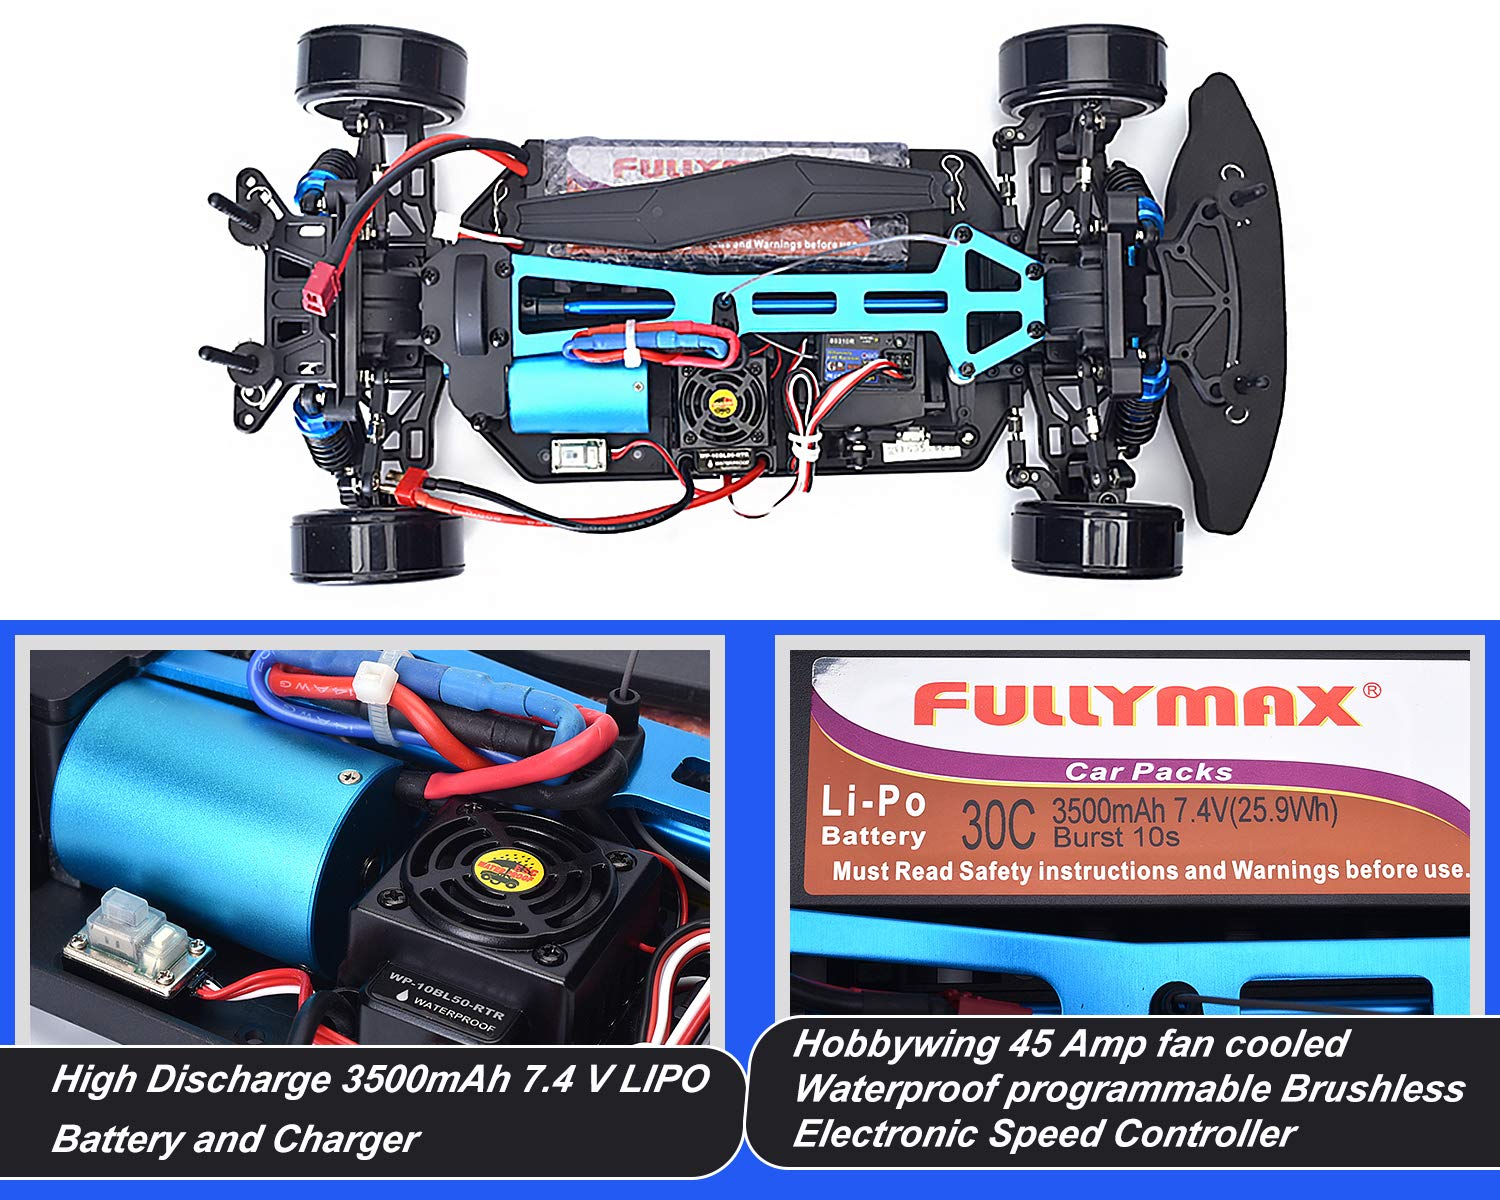 HSP RC Car 1/10 Scale 4wd OffRoad RC Drift Car Electronic Monster Truck 4x4 Vehicle Toys Brushless Motor High Speed 60km/h RTR Hobby Remote Control Car, 2022 Upgraded Car Shell with Extra 4Drift Tires